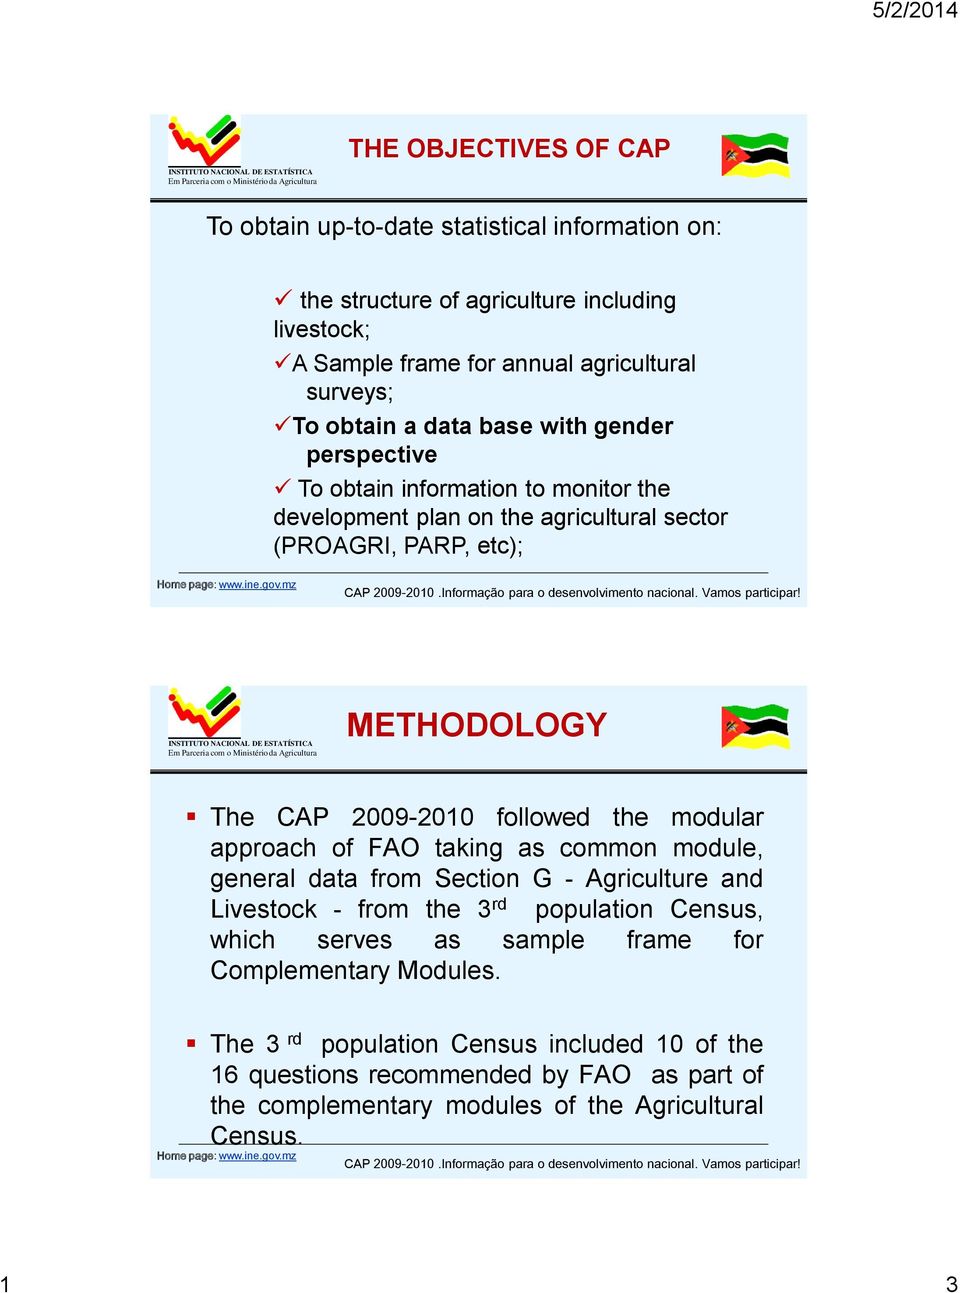 followed the modular approach of FAO taking as common module, general data from Section G - Agriculture and Livestock - from the 3 rd population Census, which serves as sample